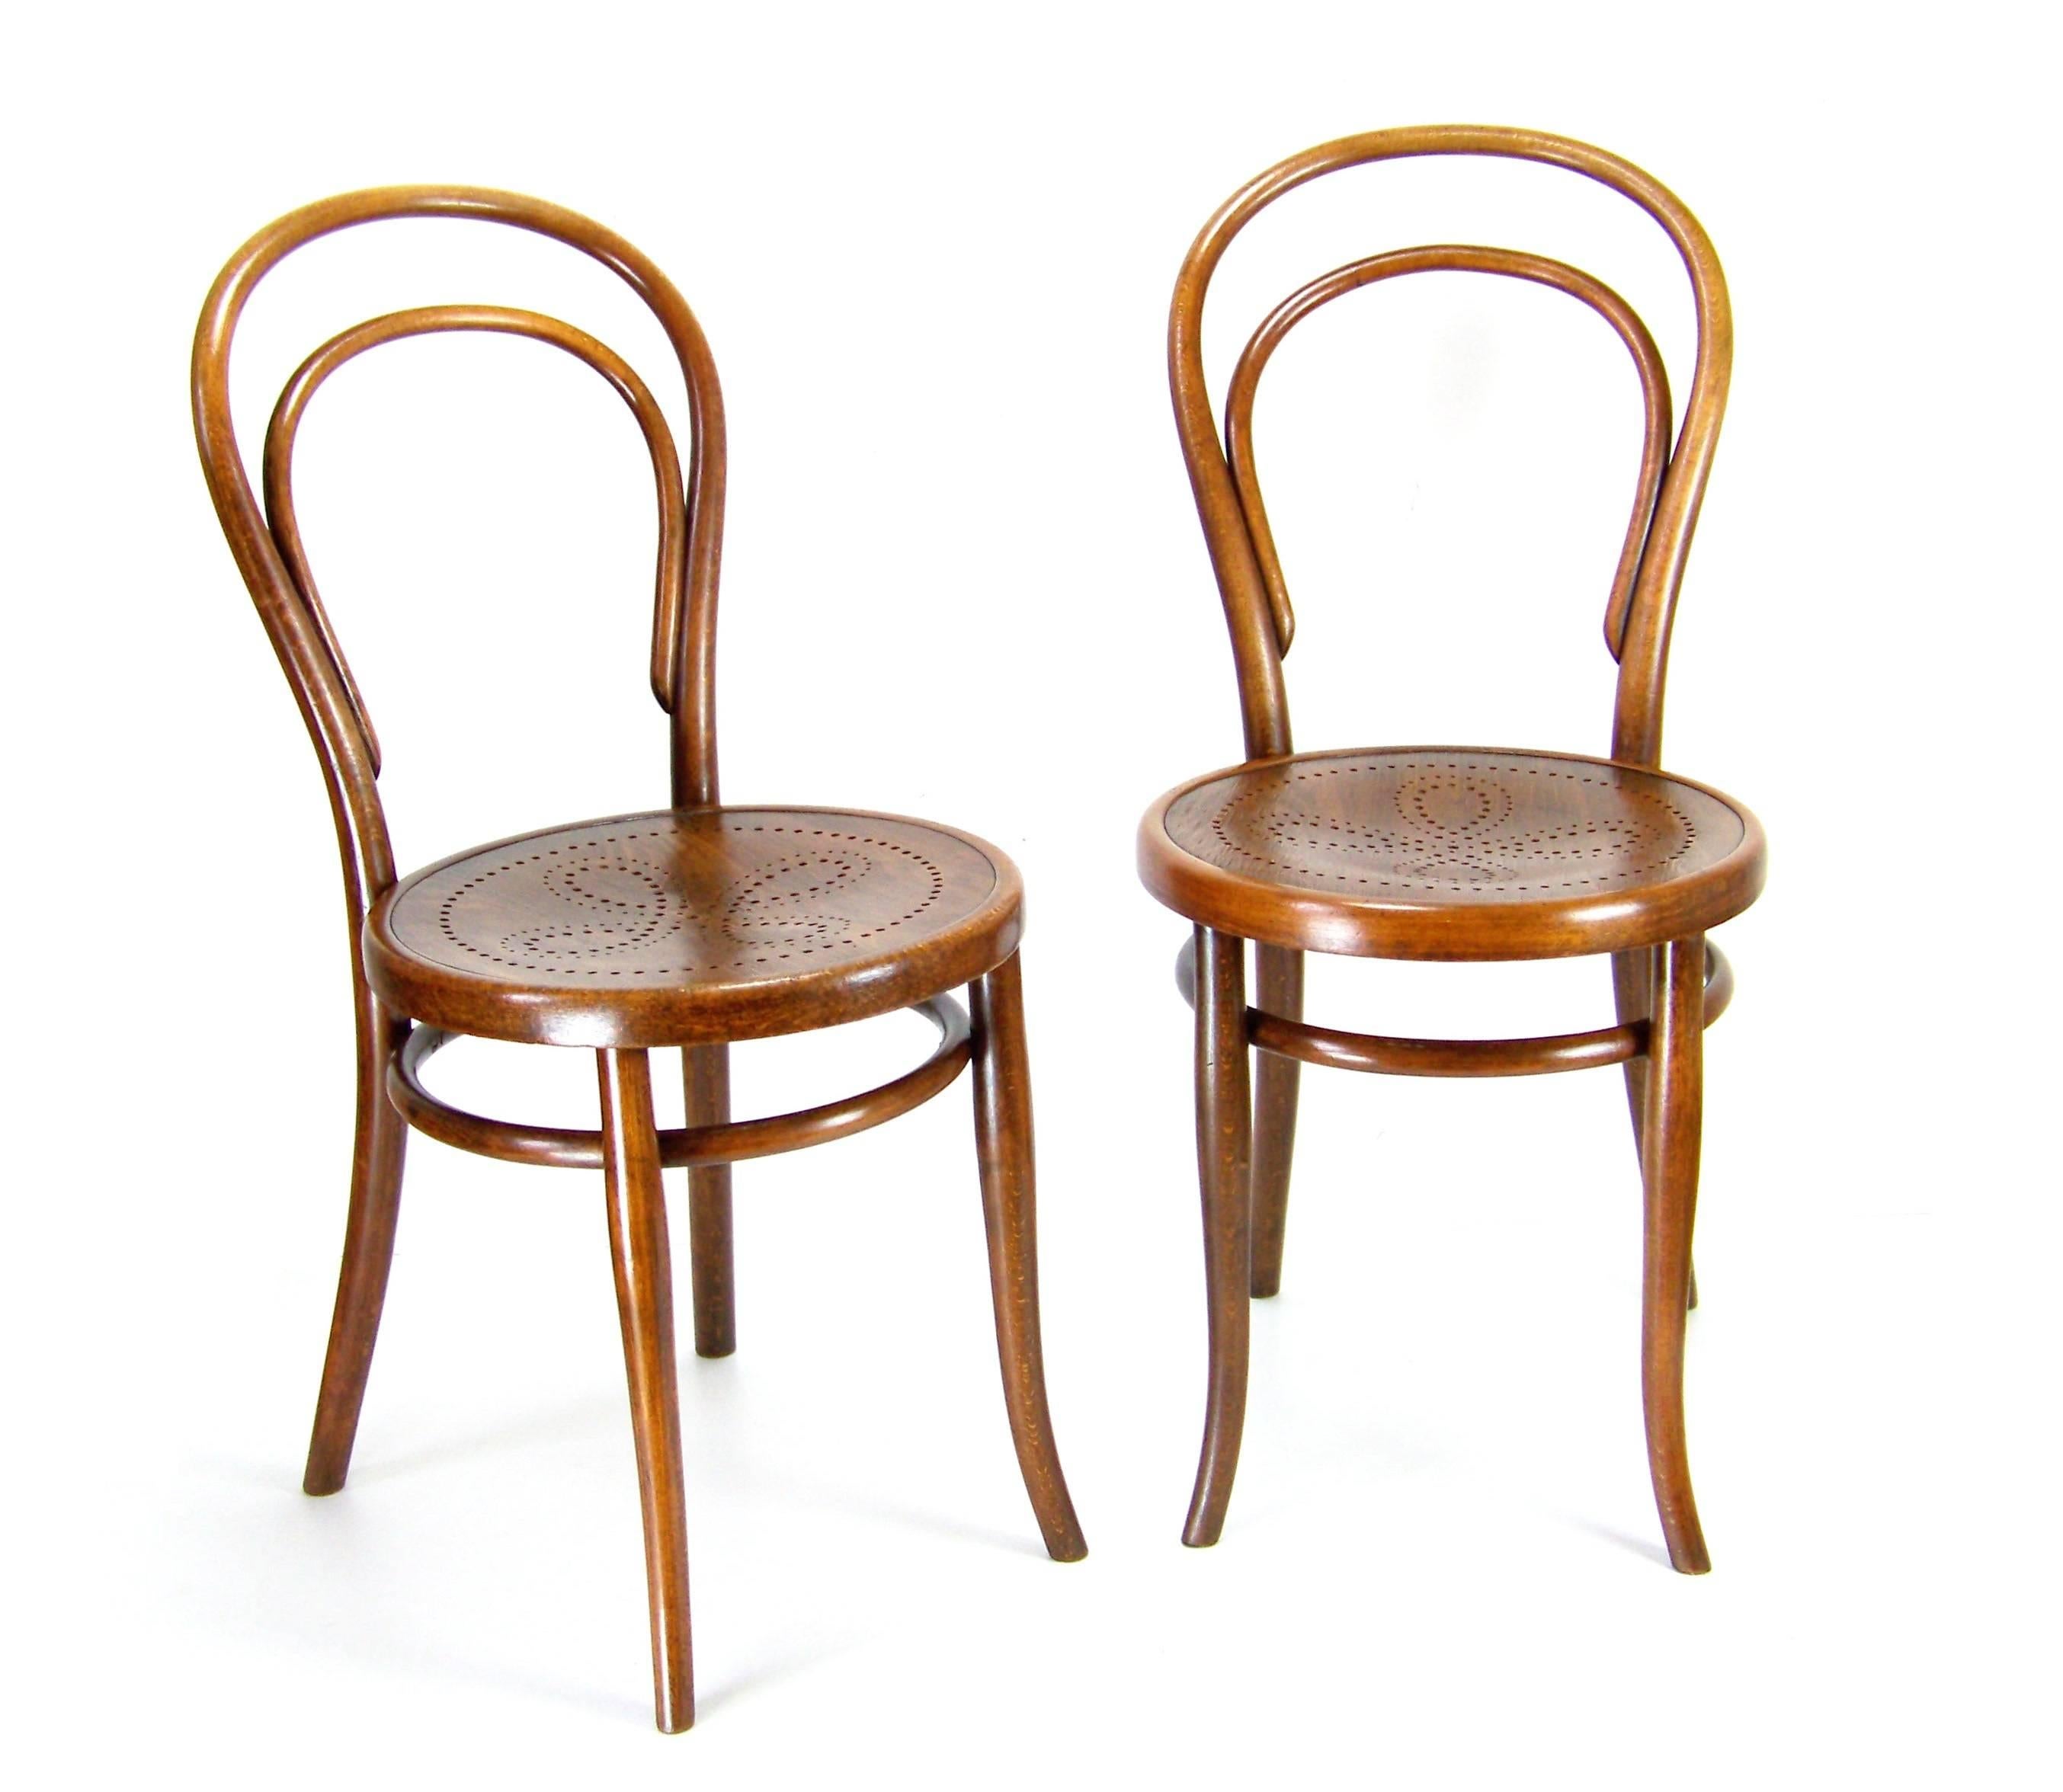 Manufactured in Austria by the Gebrüder Thonet company around year 1900. Bent beechwood. Original condition with minor signs of use. Chairs was cleaned and gentle re-polished with shellack finish. Tinny traces of woodworm (already inactive). Chair